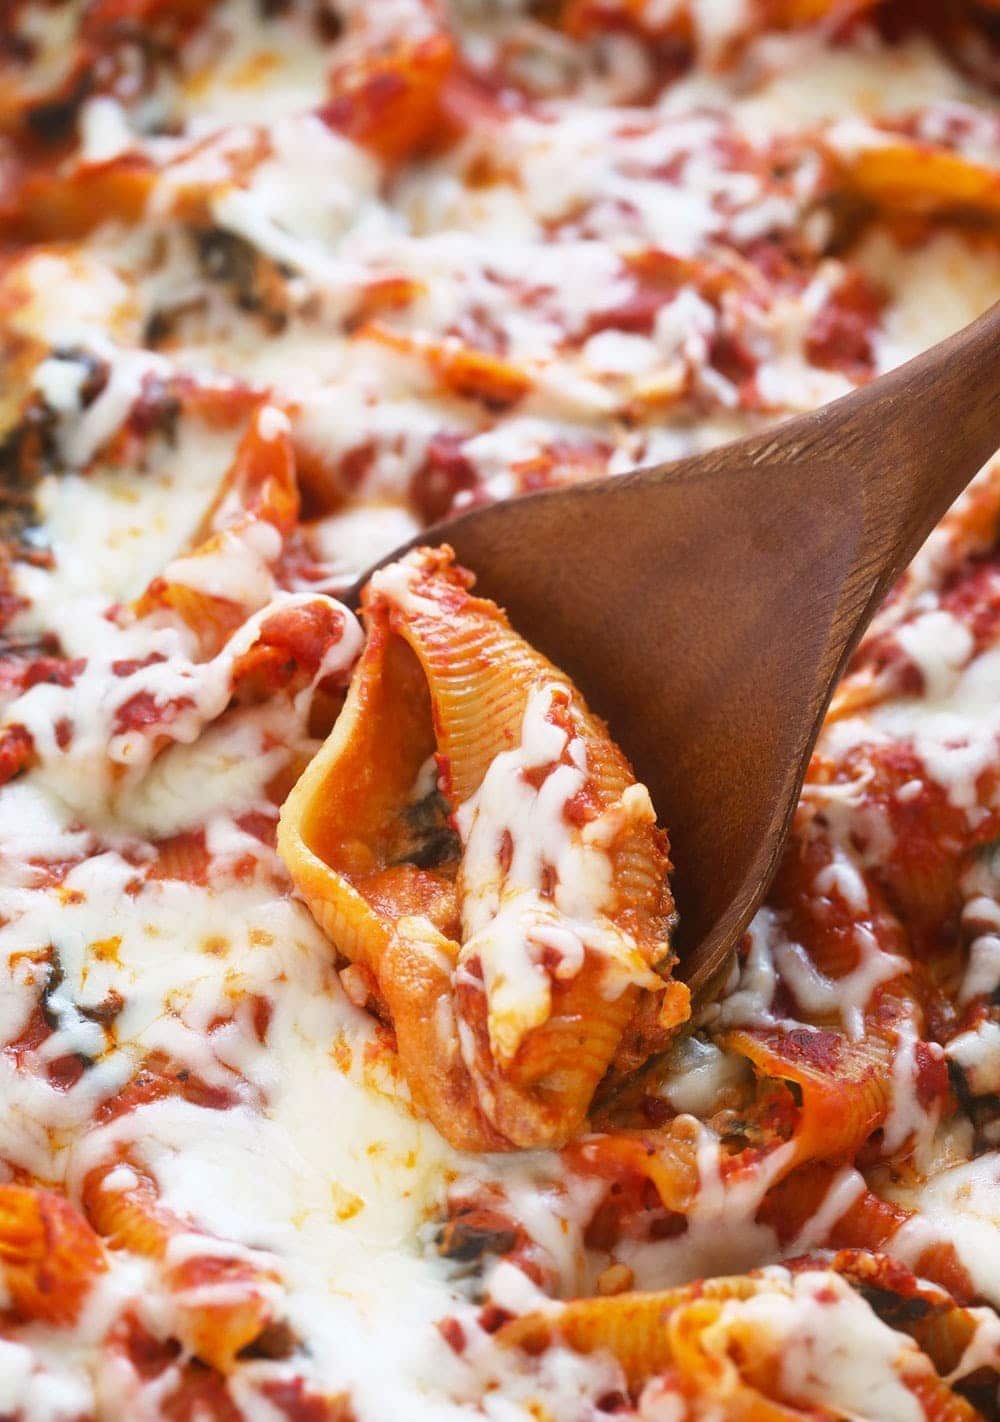 a wooden spoon is being used to scoop out a dish of Stuffed Shells.